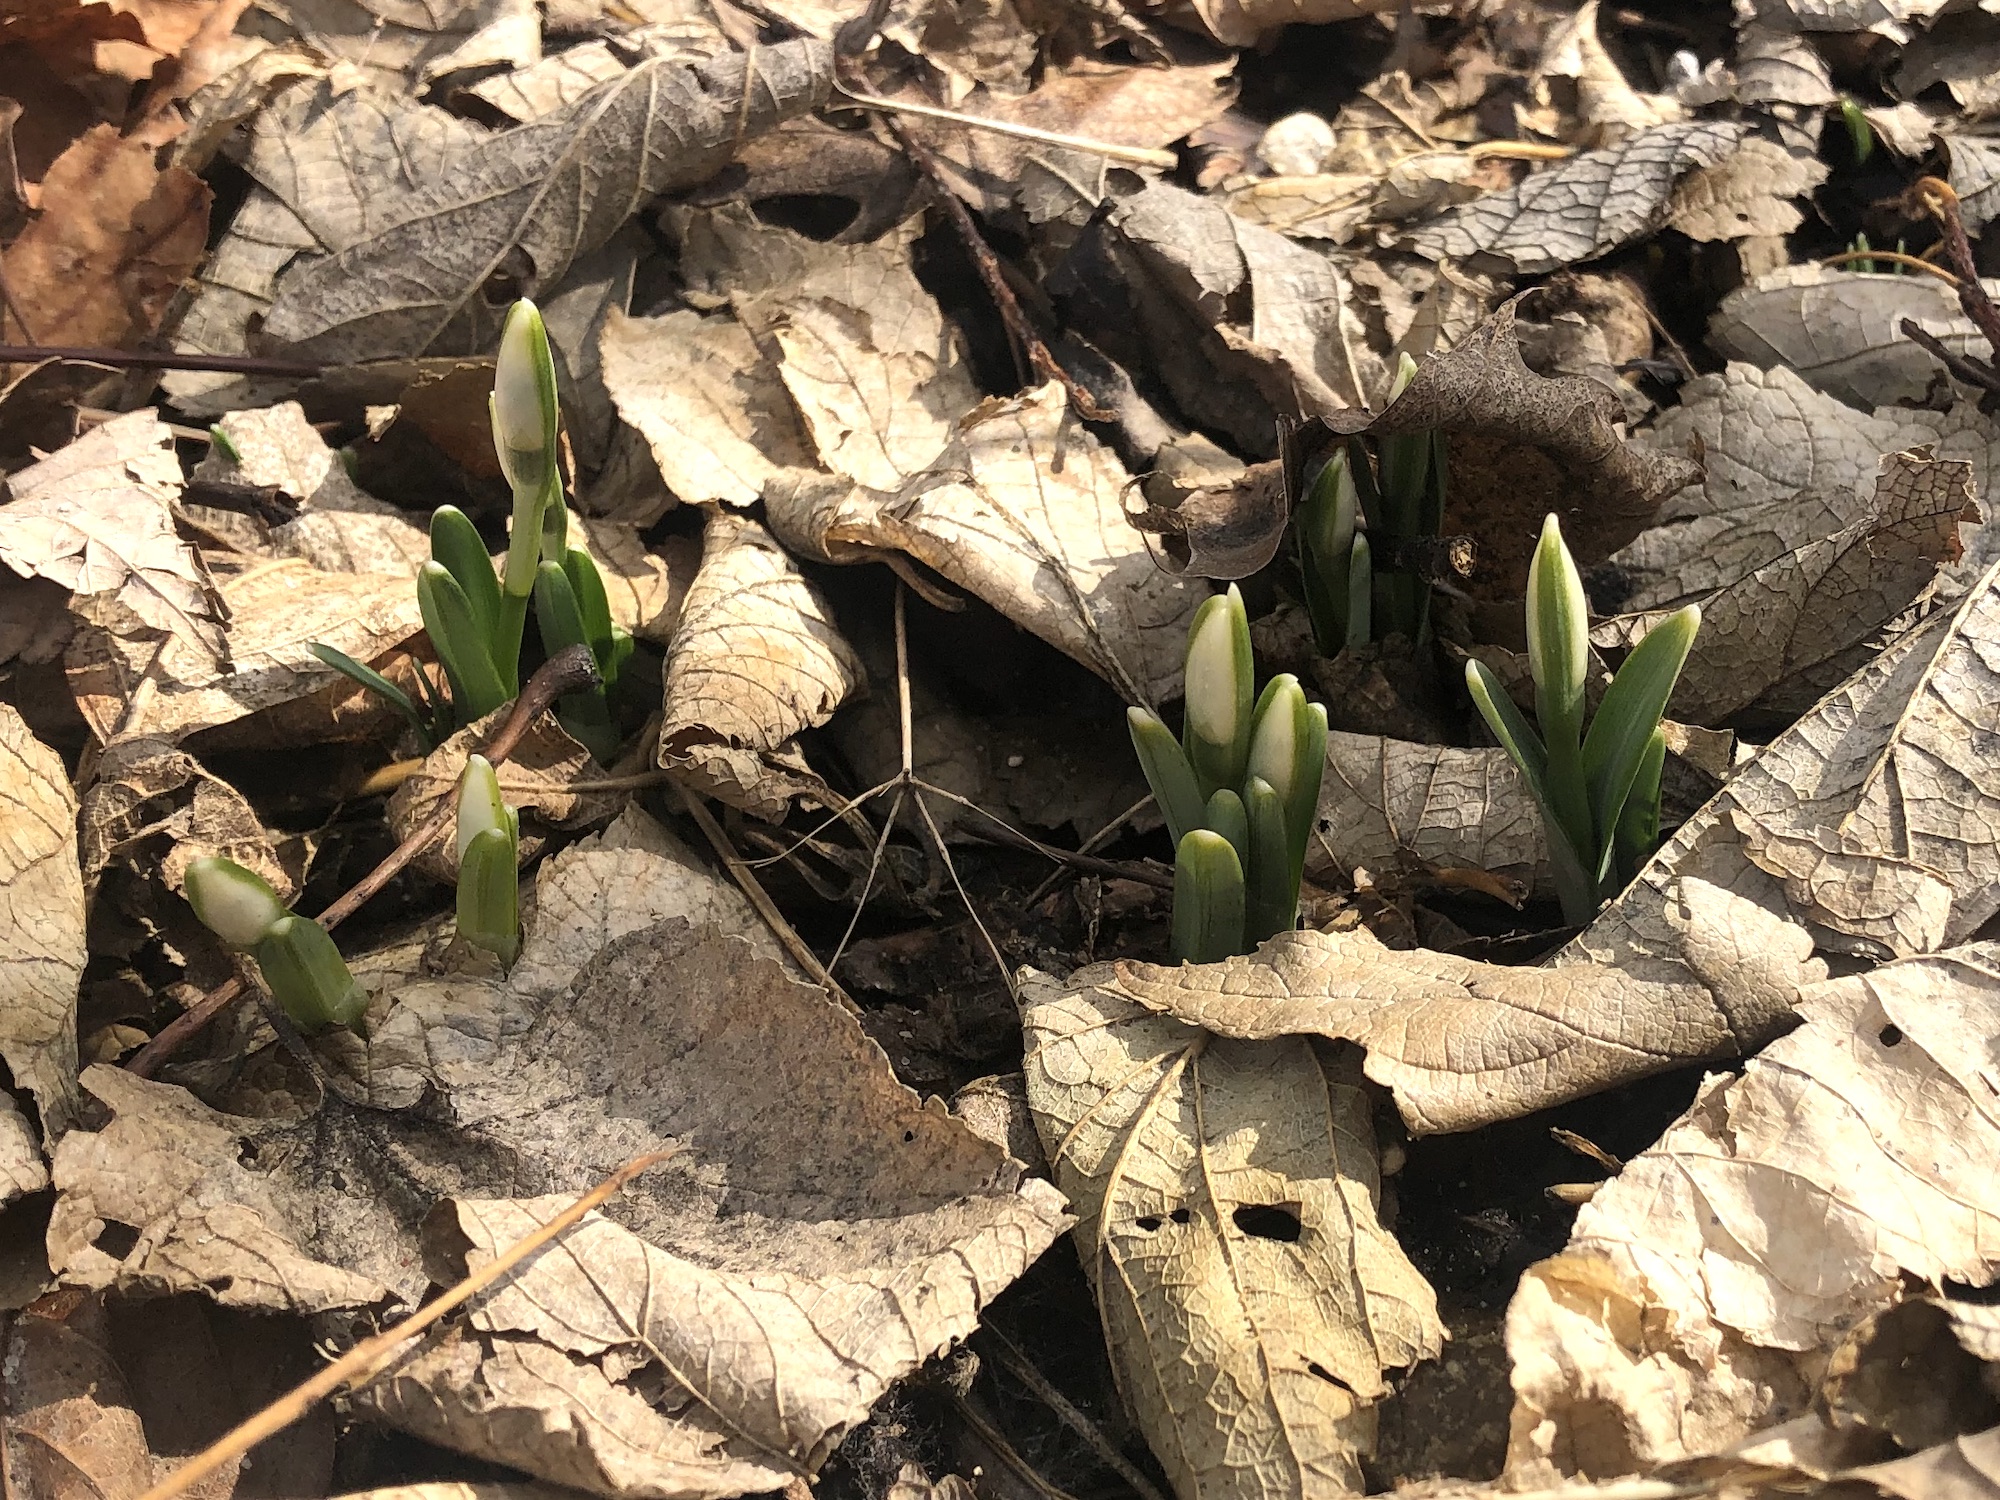 Snowdrops starting to emerge along Arbor Drive in Madison, Wisconsin on March 6, 2022.